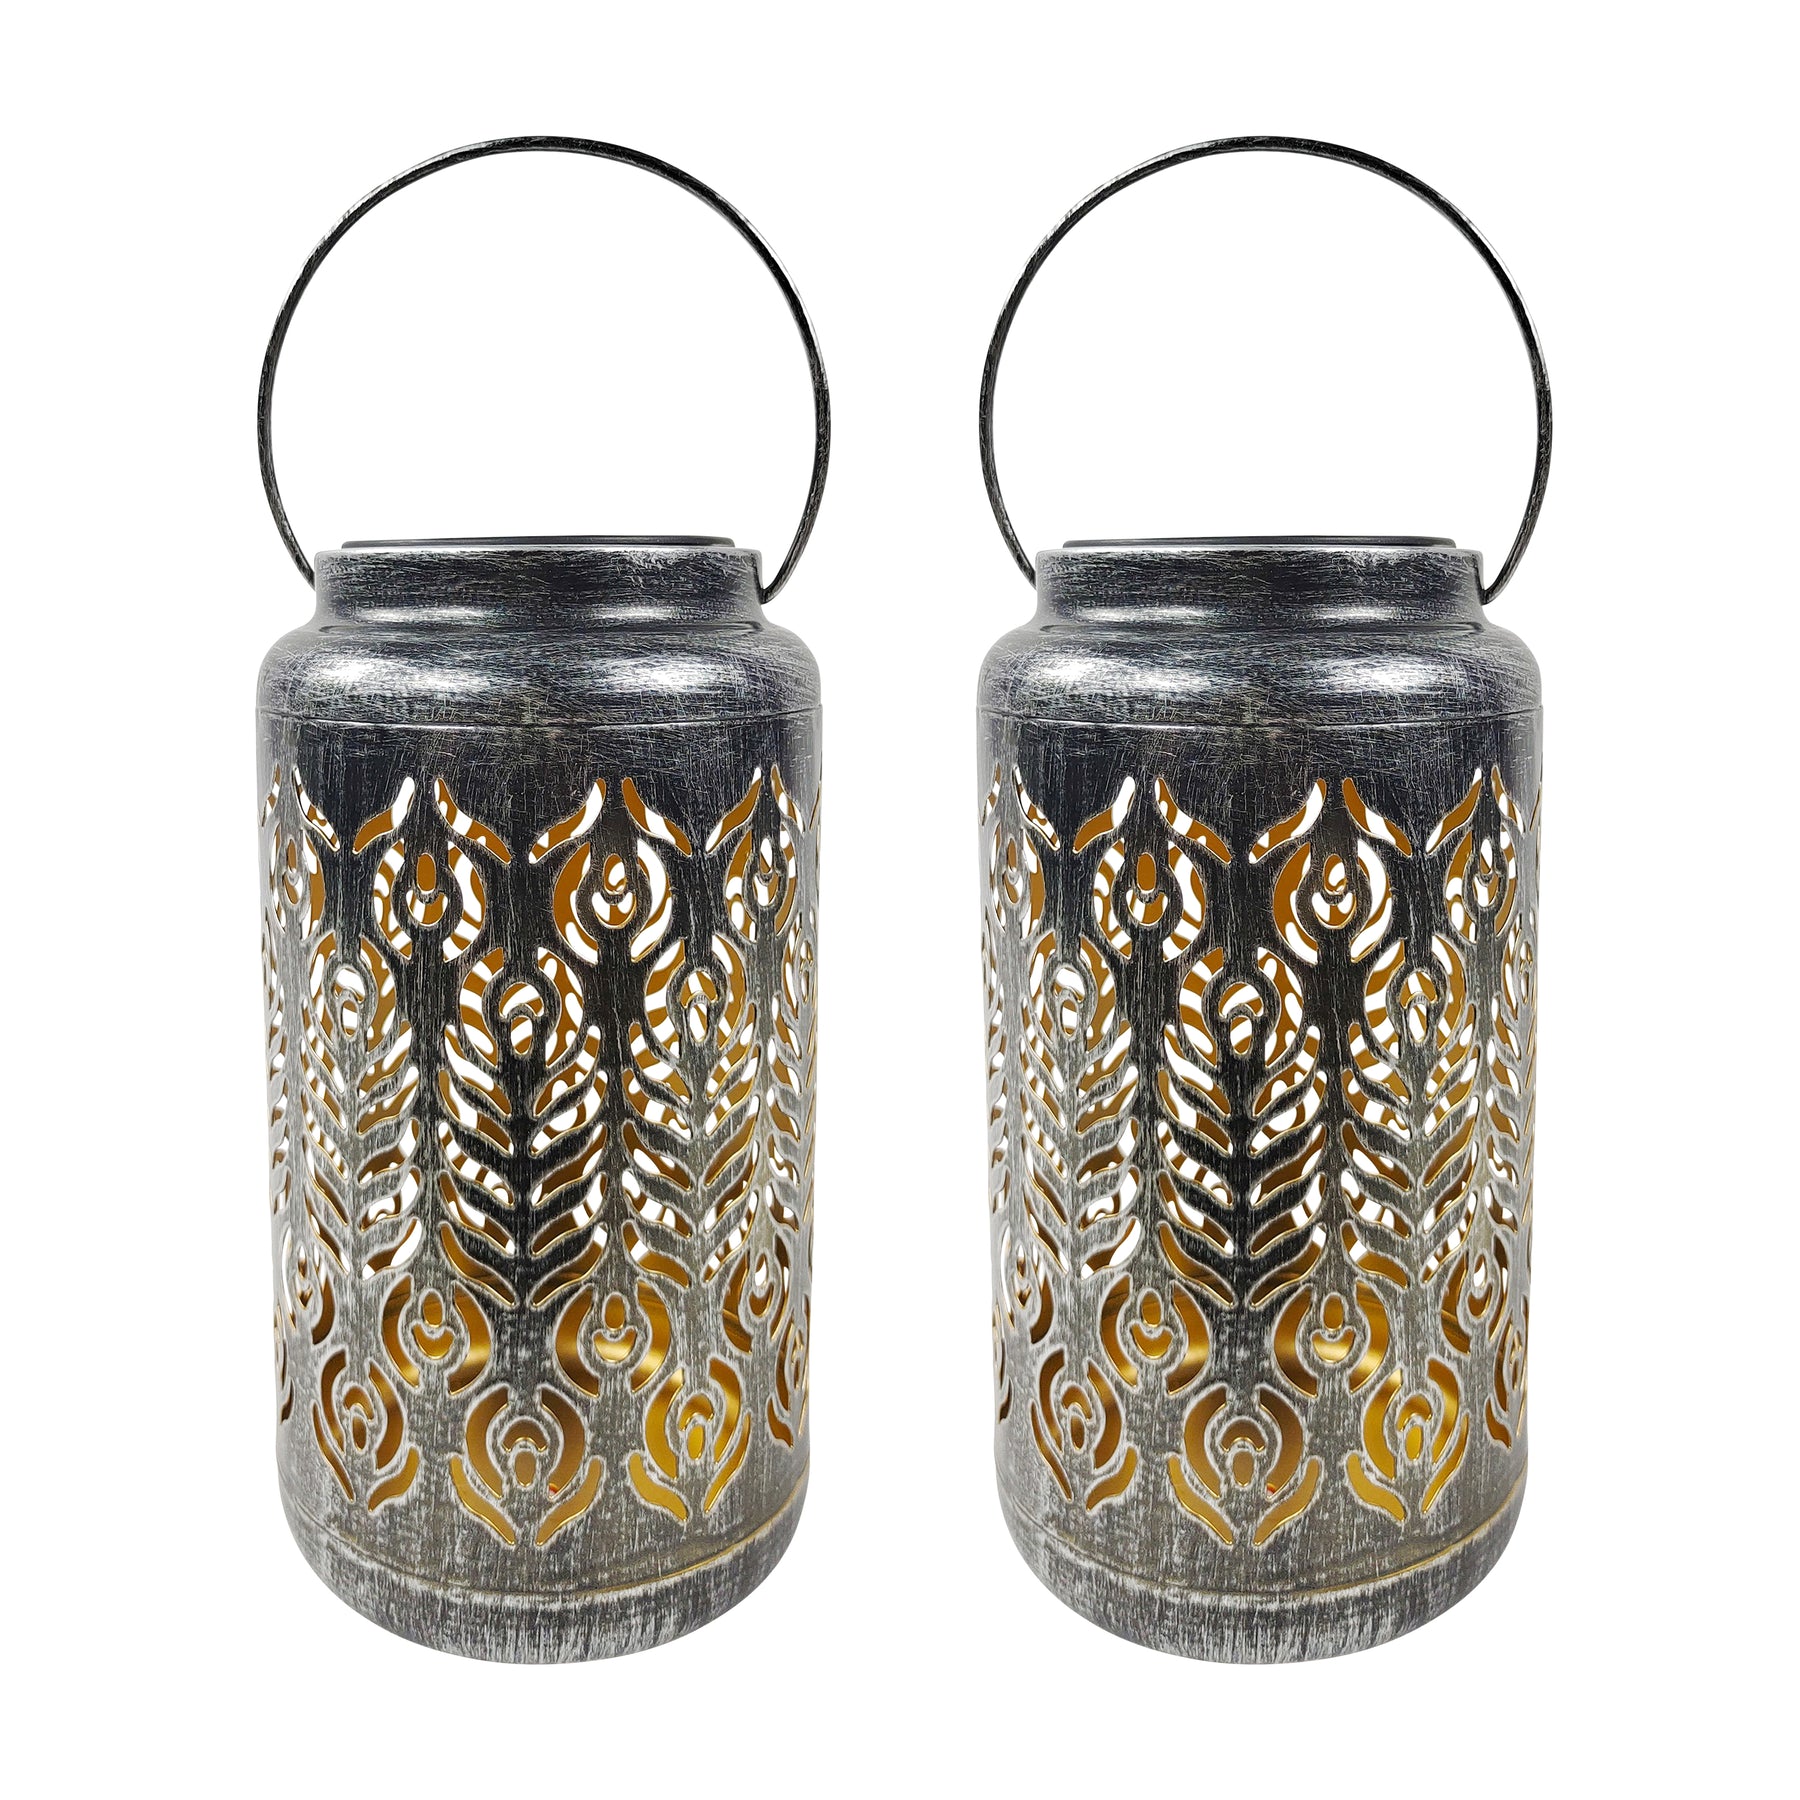 Bliss Outdoors 9-inch Tall 2-Pack Hanging and Tabletop Decorative Solar LED Lantern with Unique Phoenix Feather Design and Antique Hand Painted Finish in the Brushed Silver variation.